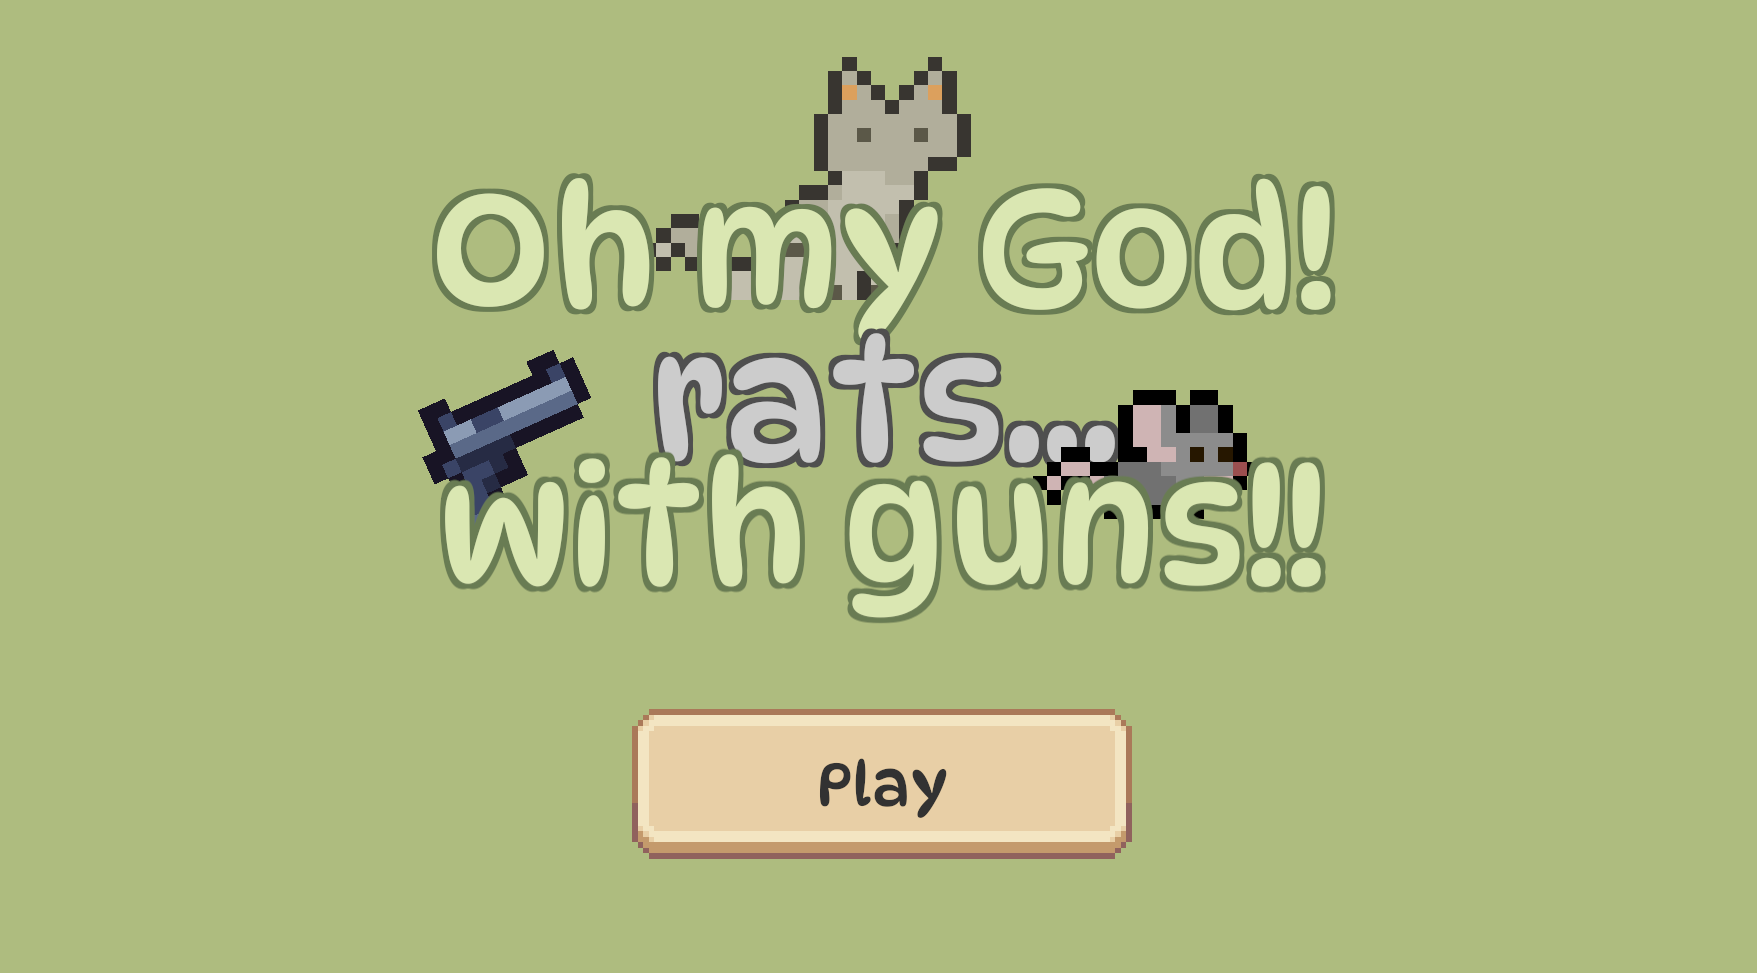 Oh my God! Rats... With guns!!